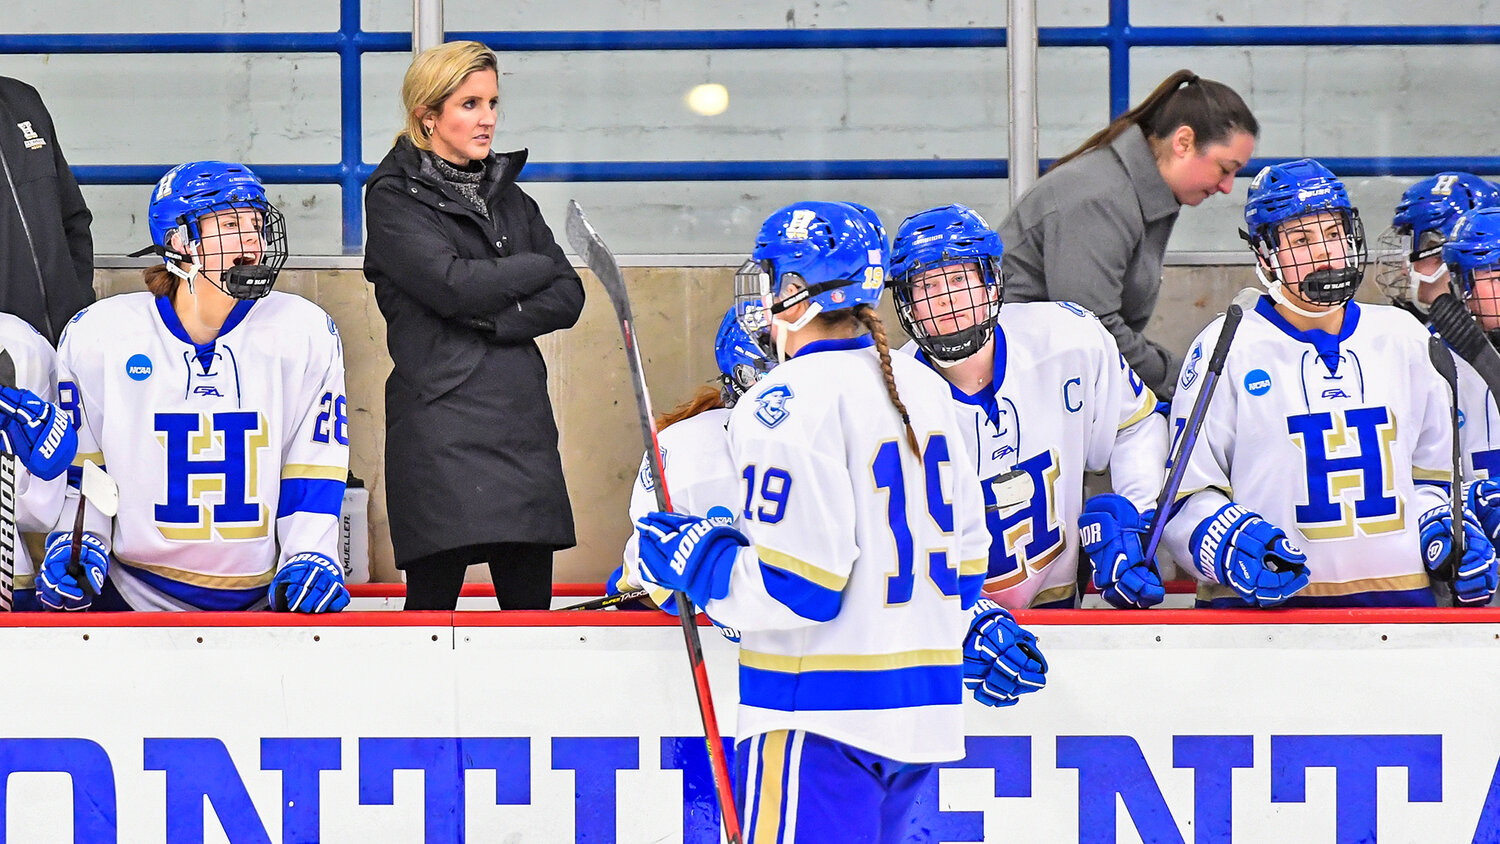 Hamilton College head women’s hockey coach Emily McNamara stands on the bench between players during the team’s NCAA Division III first round game at home against Nazareth College. McNamara has been chosen as the 2023 American Hockey Coaches Association Women’s Division III Coach of the Year.